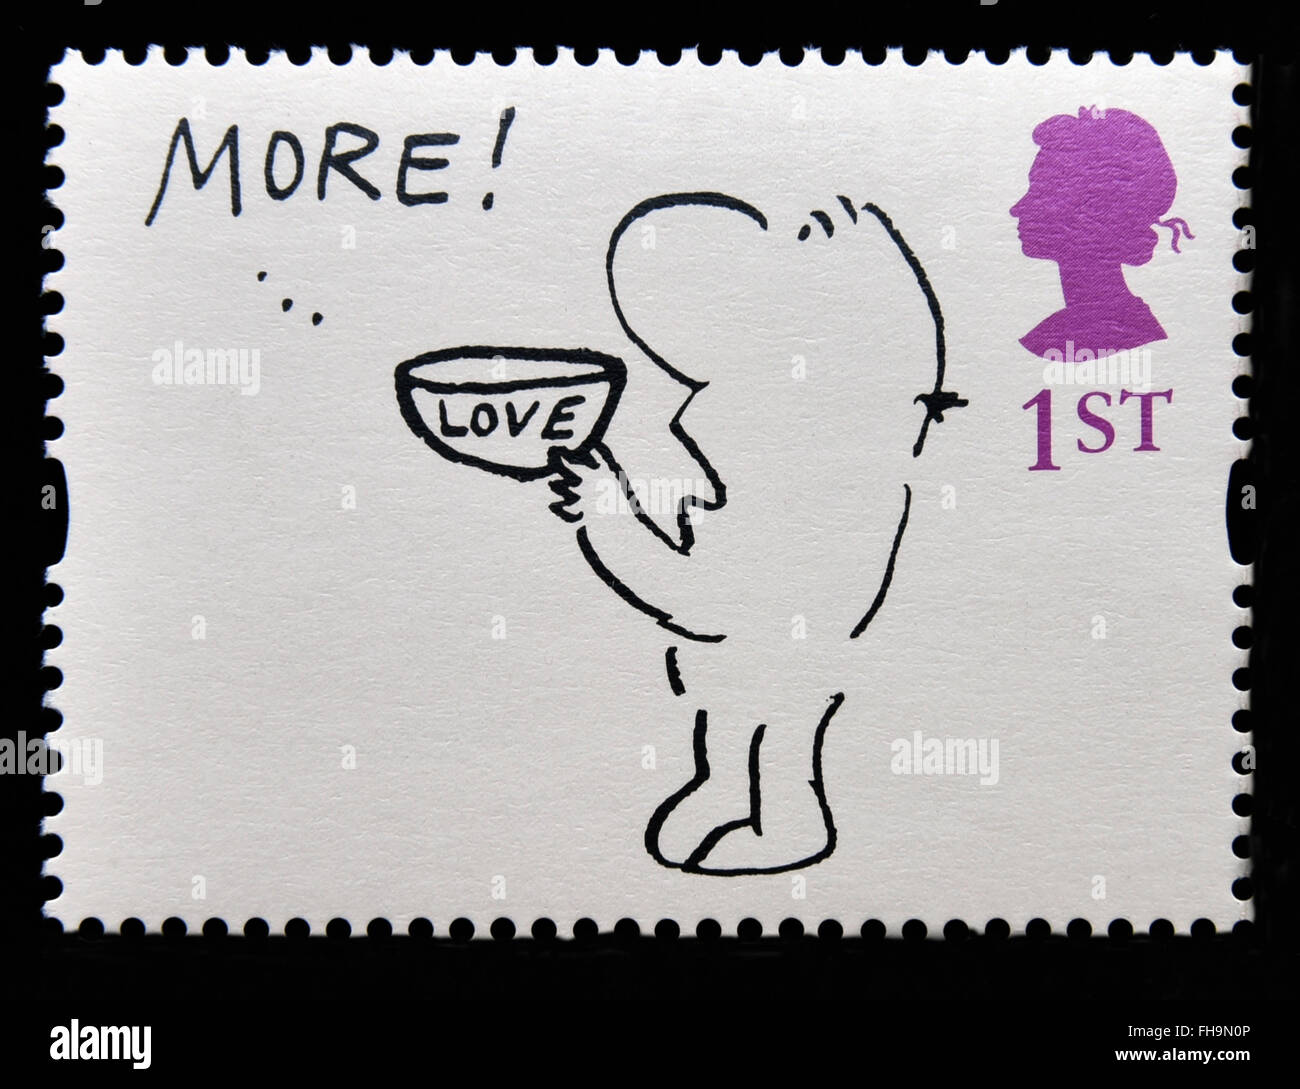 Postage stamp. Great Britain. Queen Elizabeth II. 1996. Greetings Stamps. Cartoons. 'MORE! LOVE'. 1st. Stock Photo